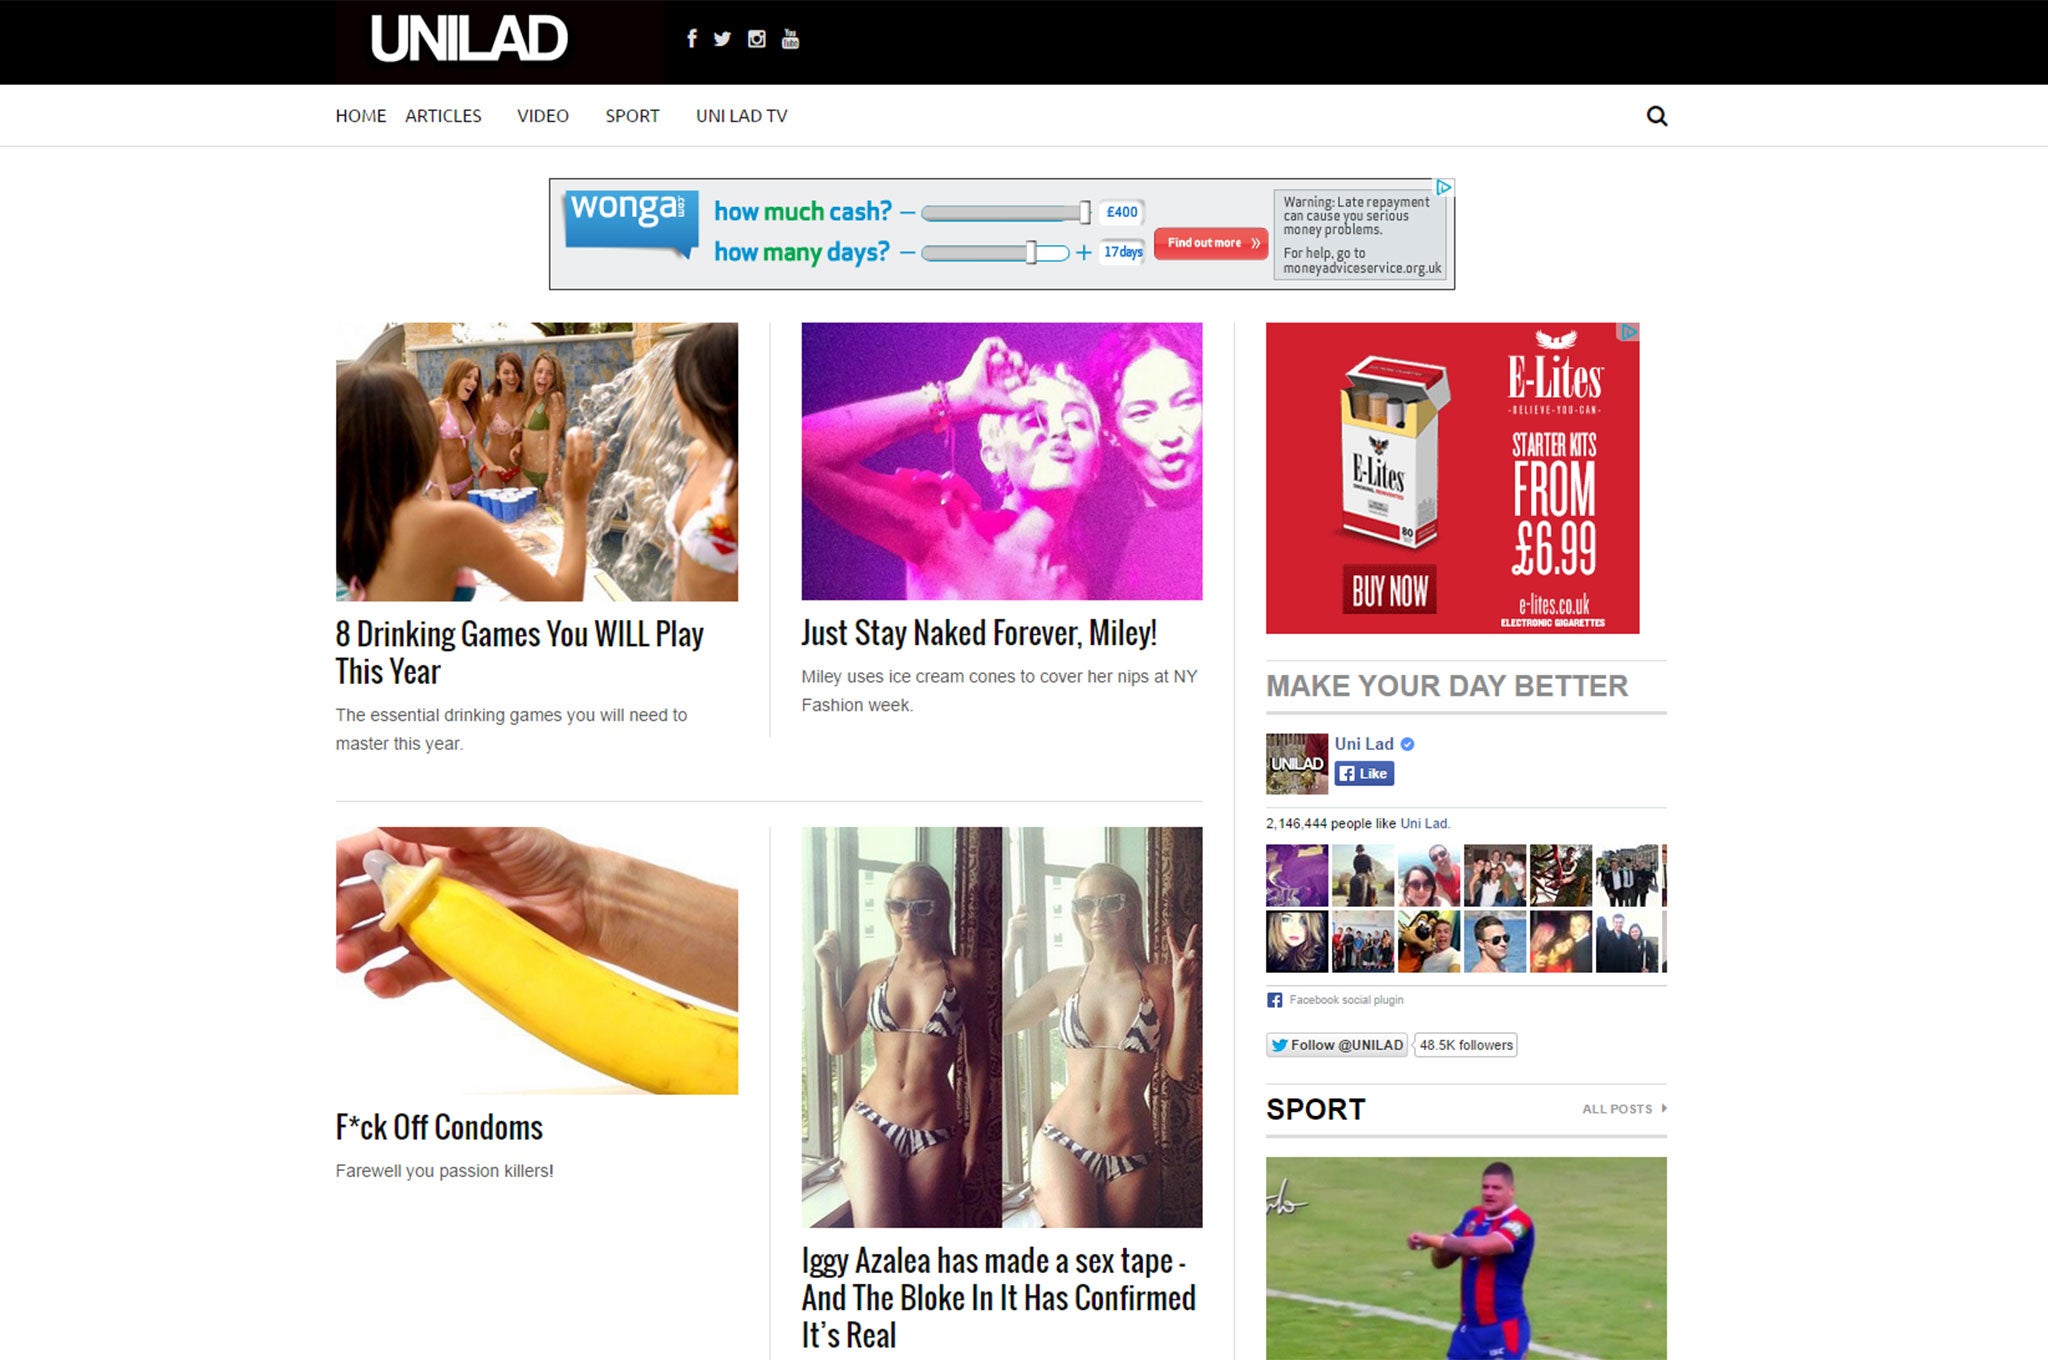 Sites such as Unilad are often accused of normalising misogyny